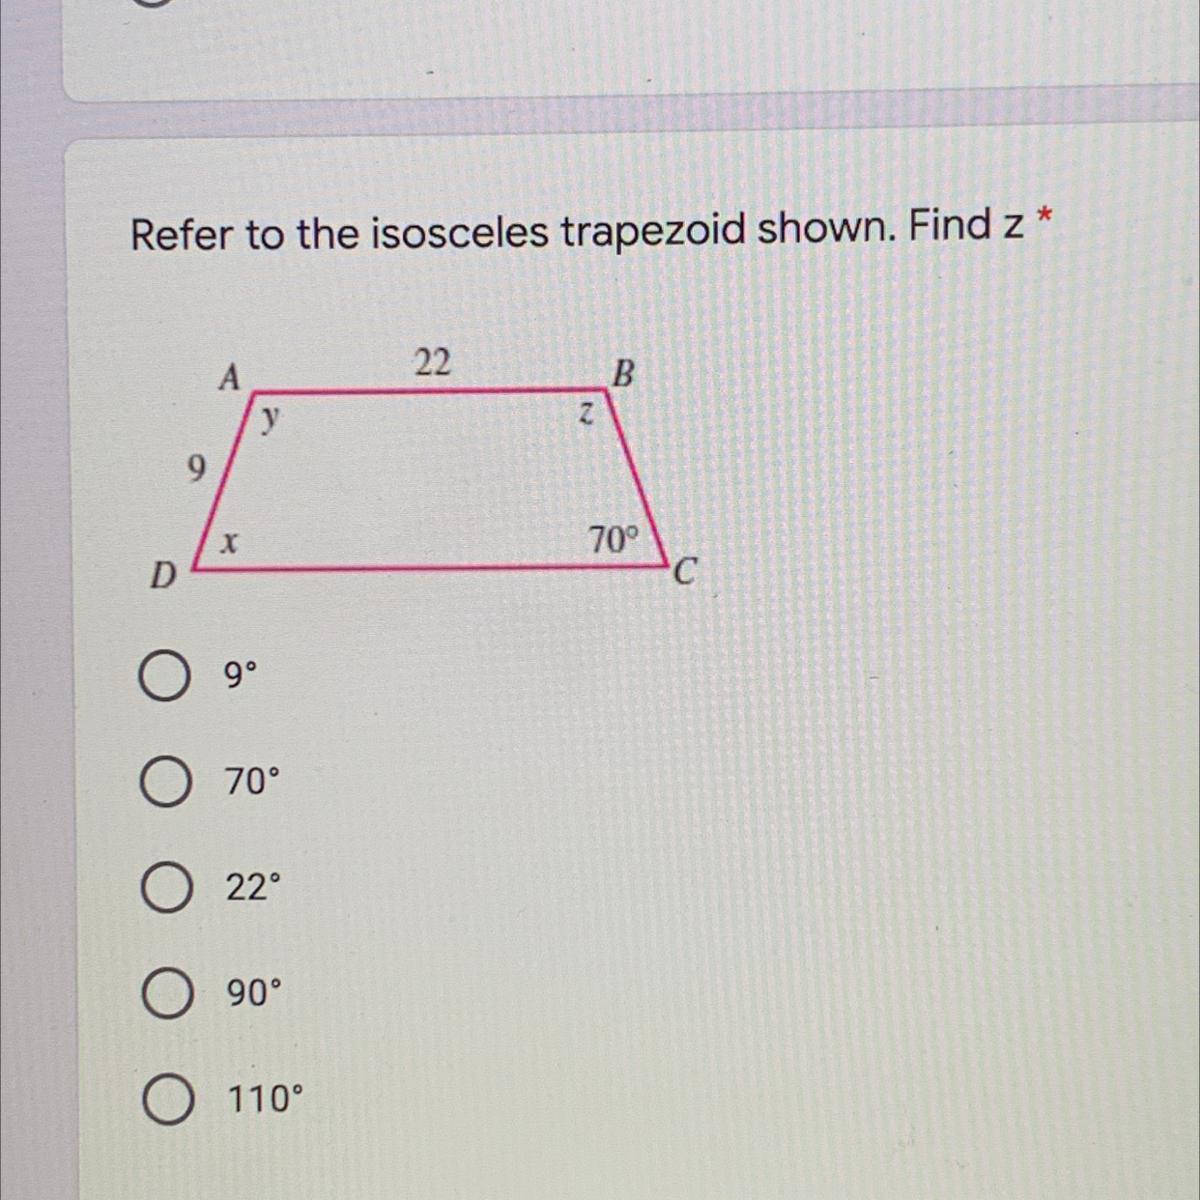 Refer To The Isosceles Trapezoid Shown. Find Z 